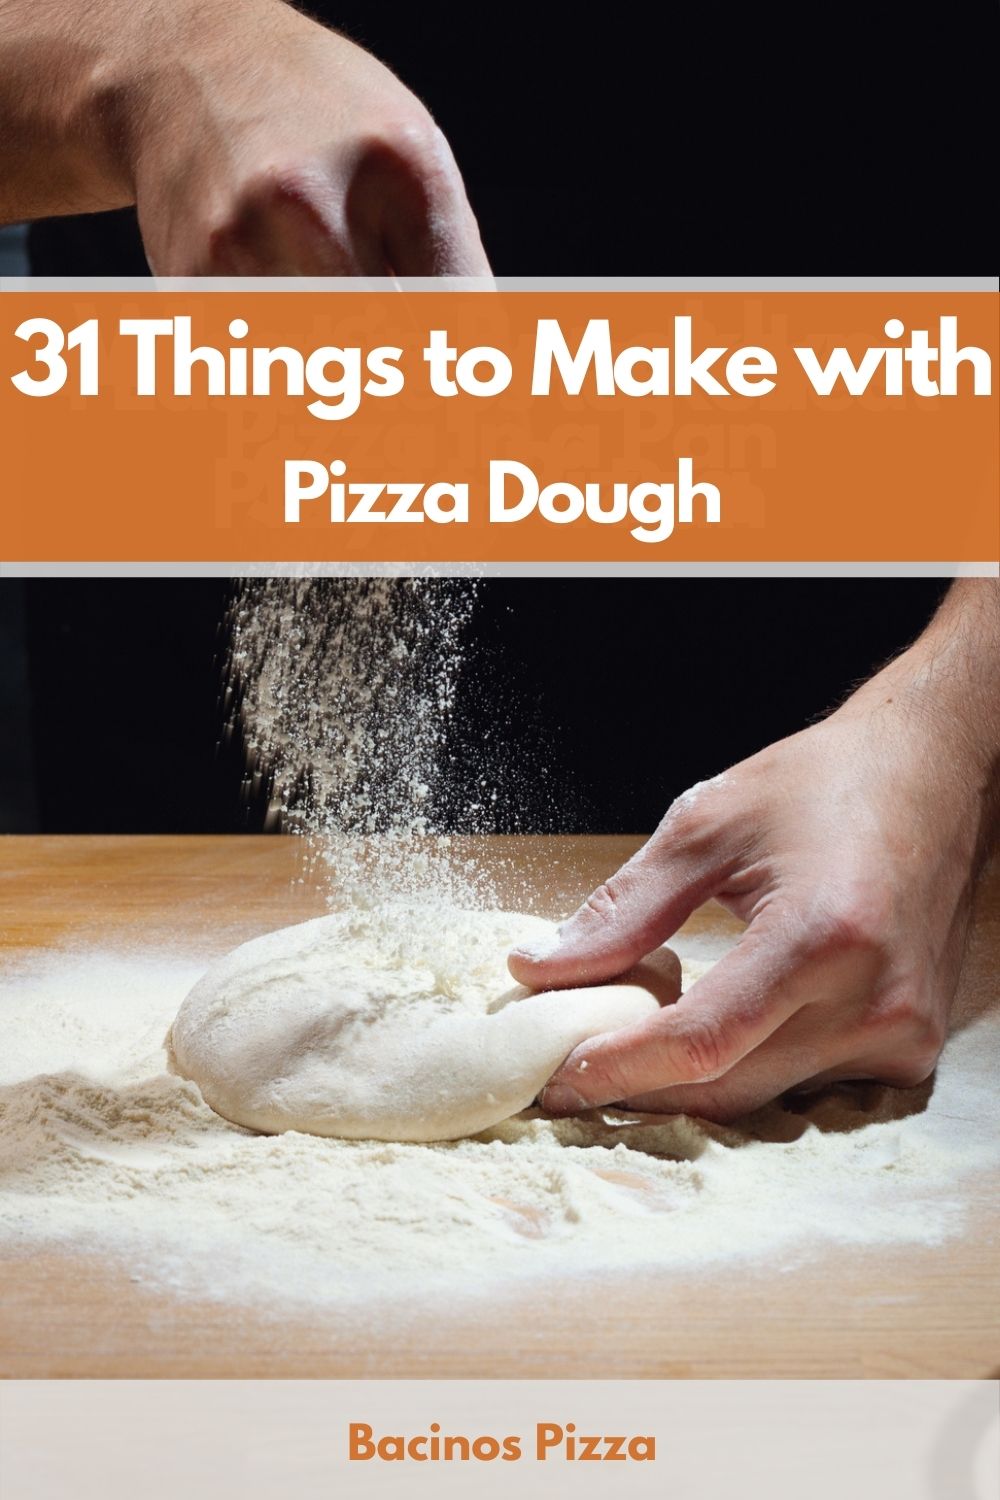 31 Things to Make with Pizza Dough pin